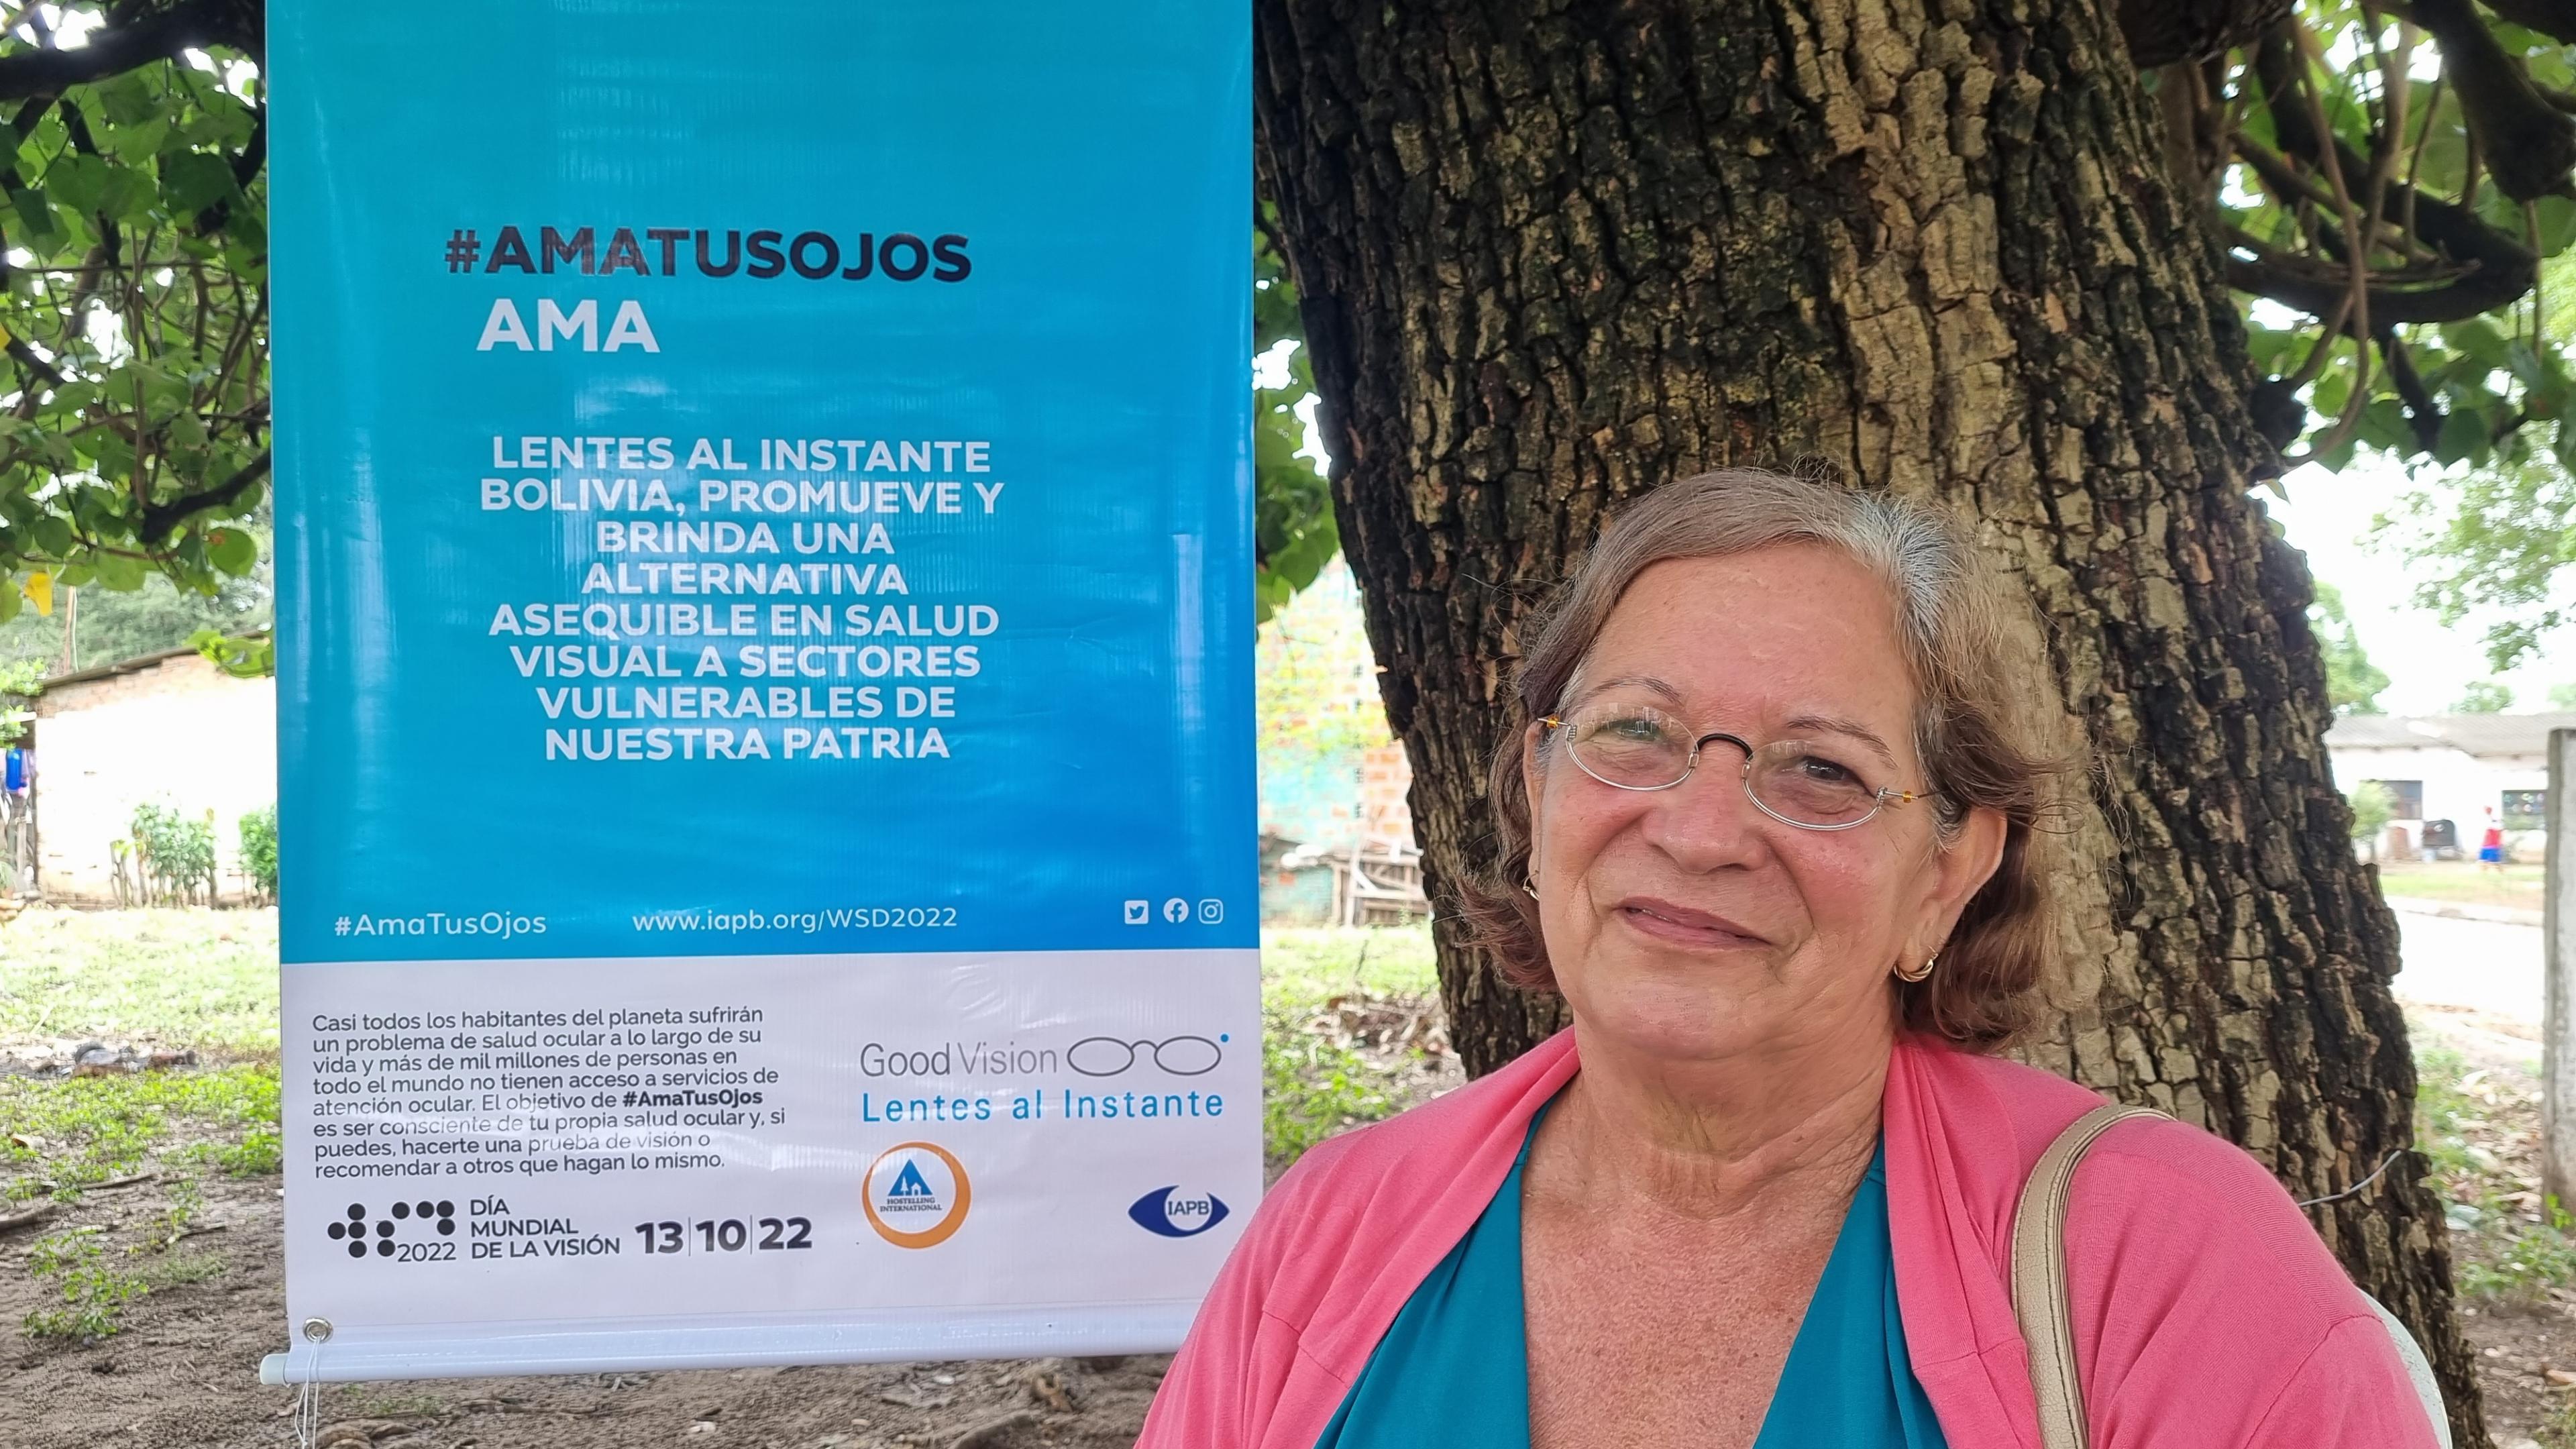 Patient in Bolivia in front of educational poster on the occasion of World Sight Day